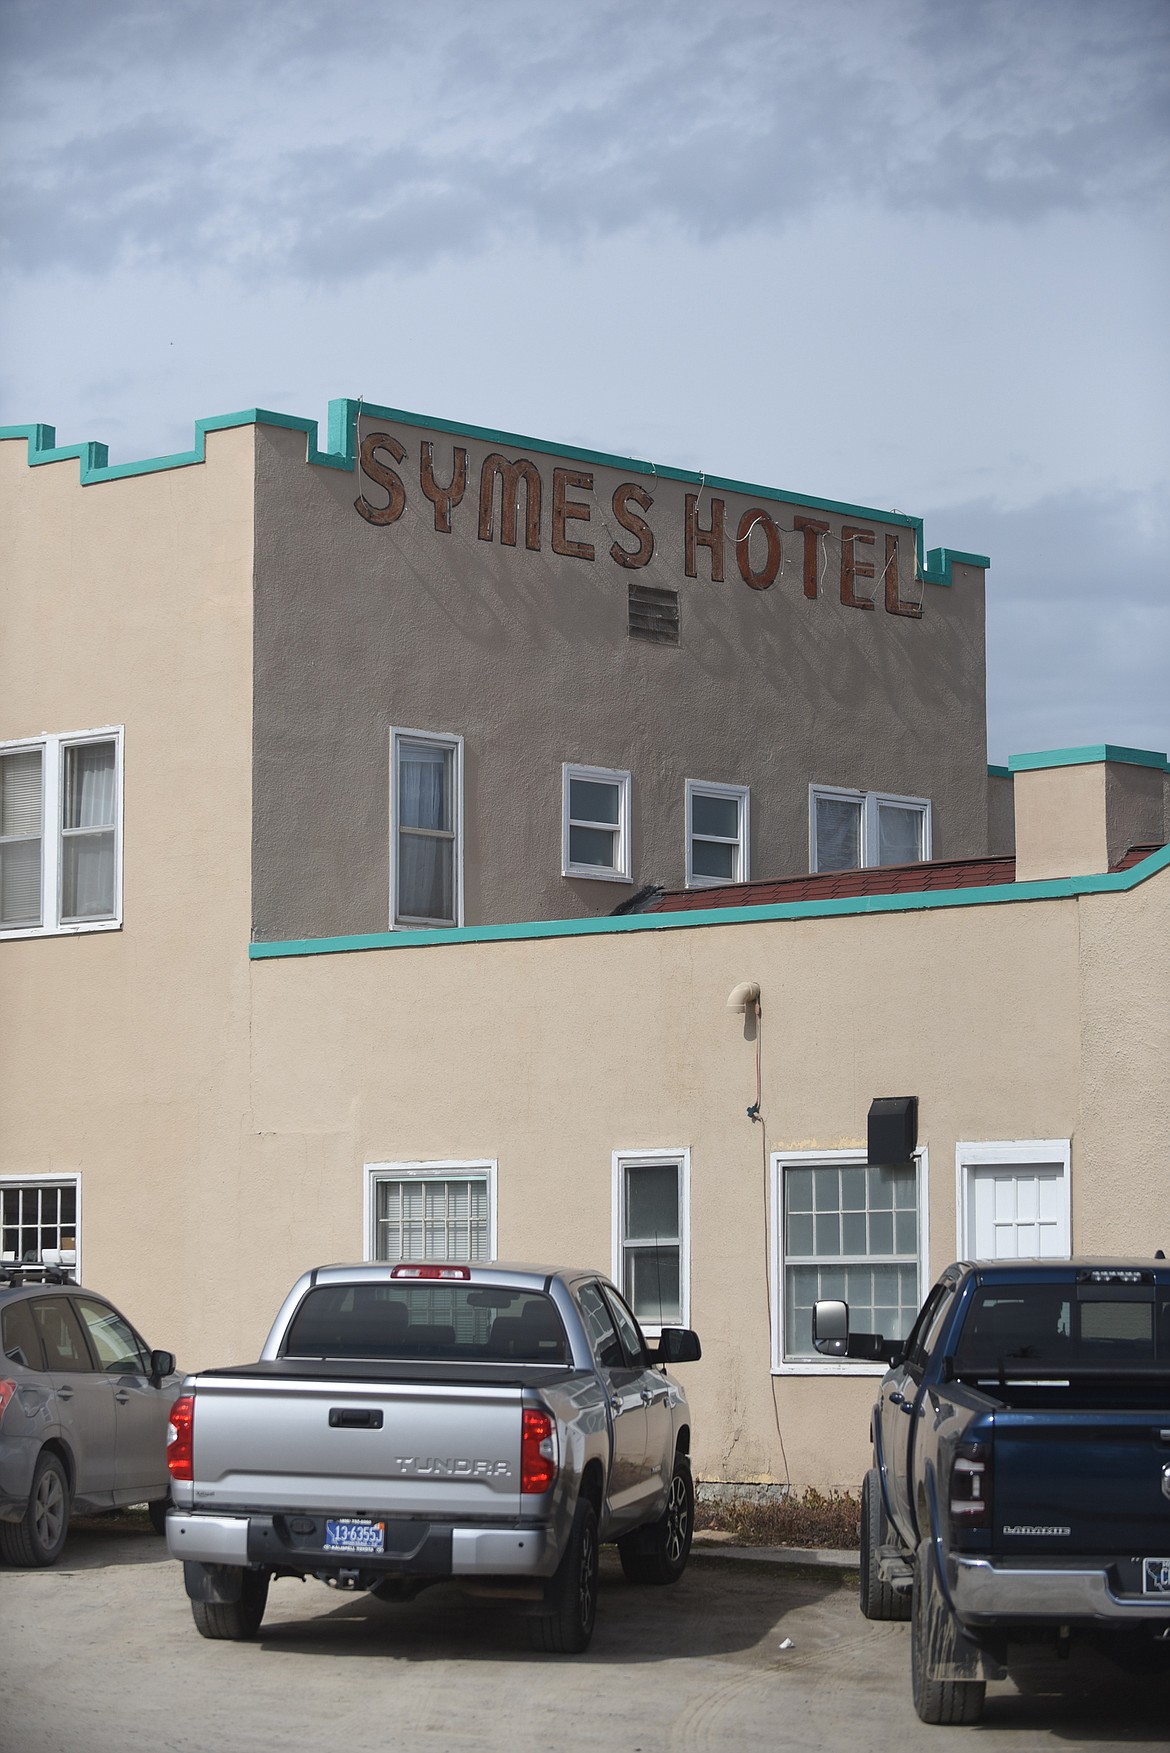 The renowned Symes Hotel in Hot Springs was the target of thieves recently. (Scott Shindledecker/Valley Press)